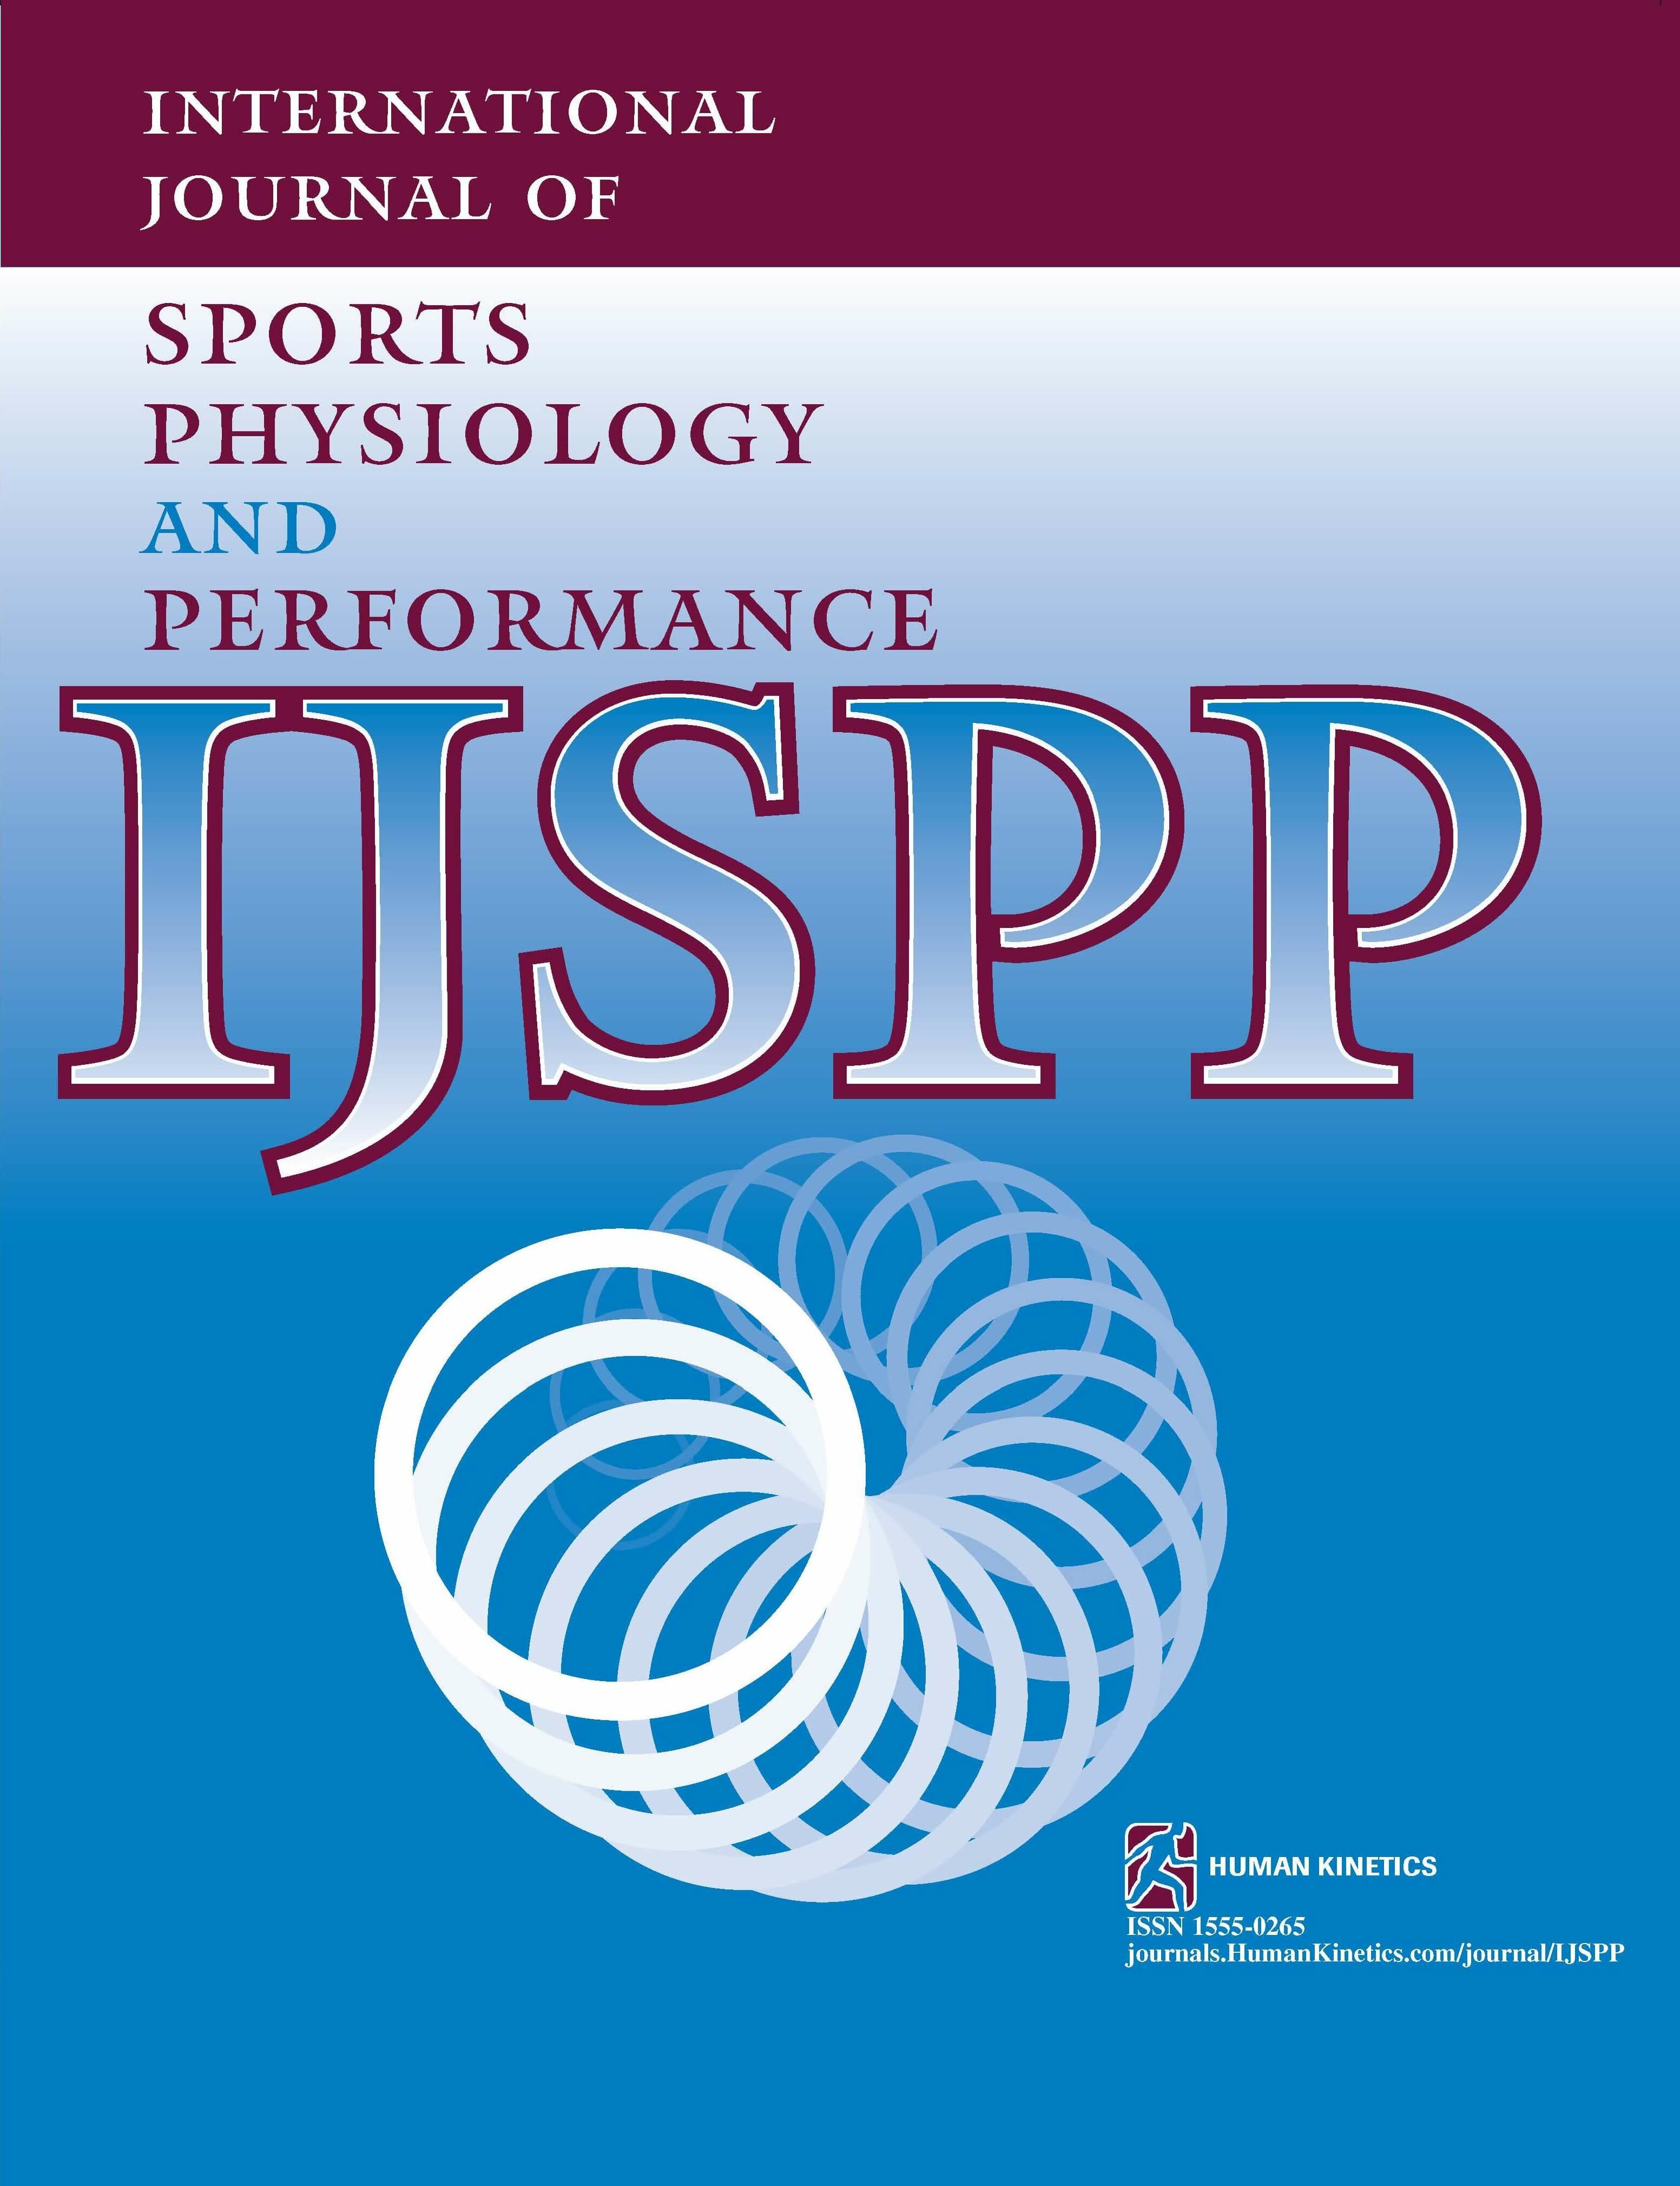 An Analysis of Positional Generic and Individualized Speed Thresholds Within the Most Demanding Phases of Match Play in the English Premier League